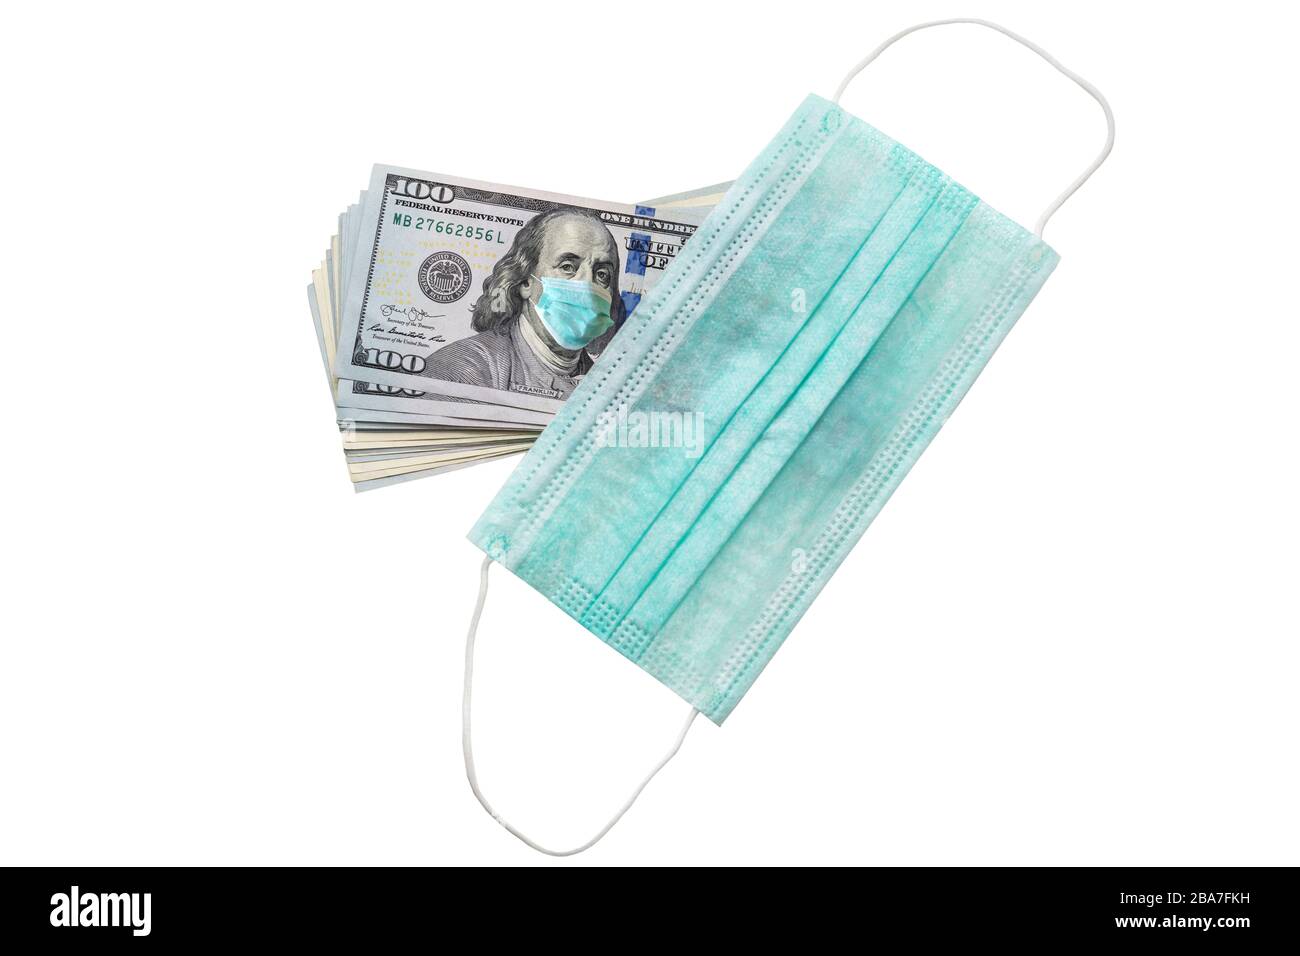 Dollars money bills with face mask Stock Photo